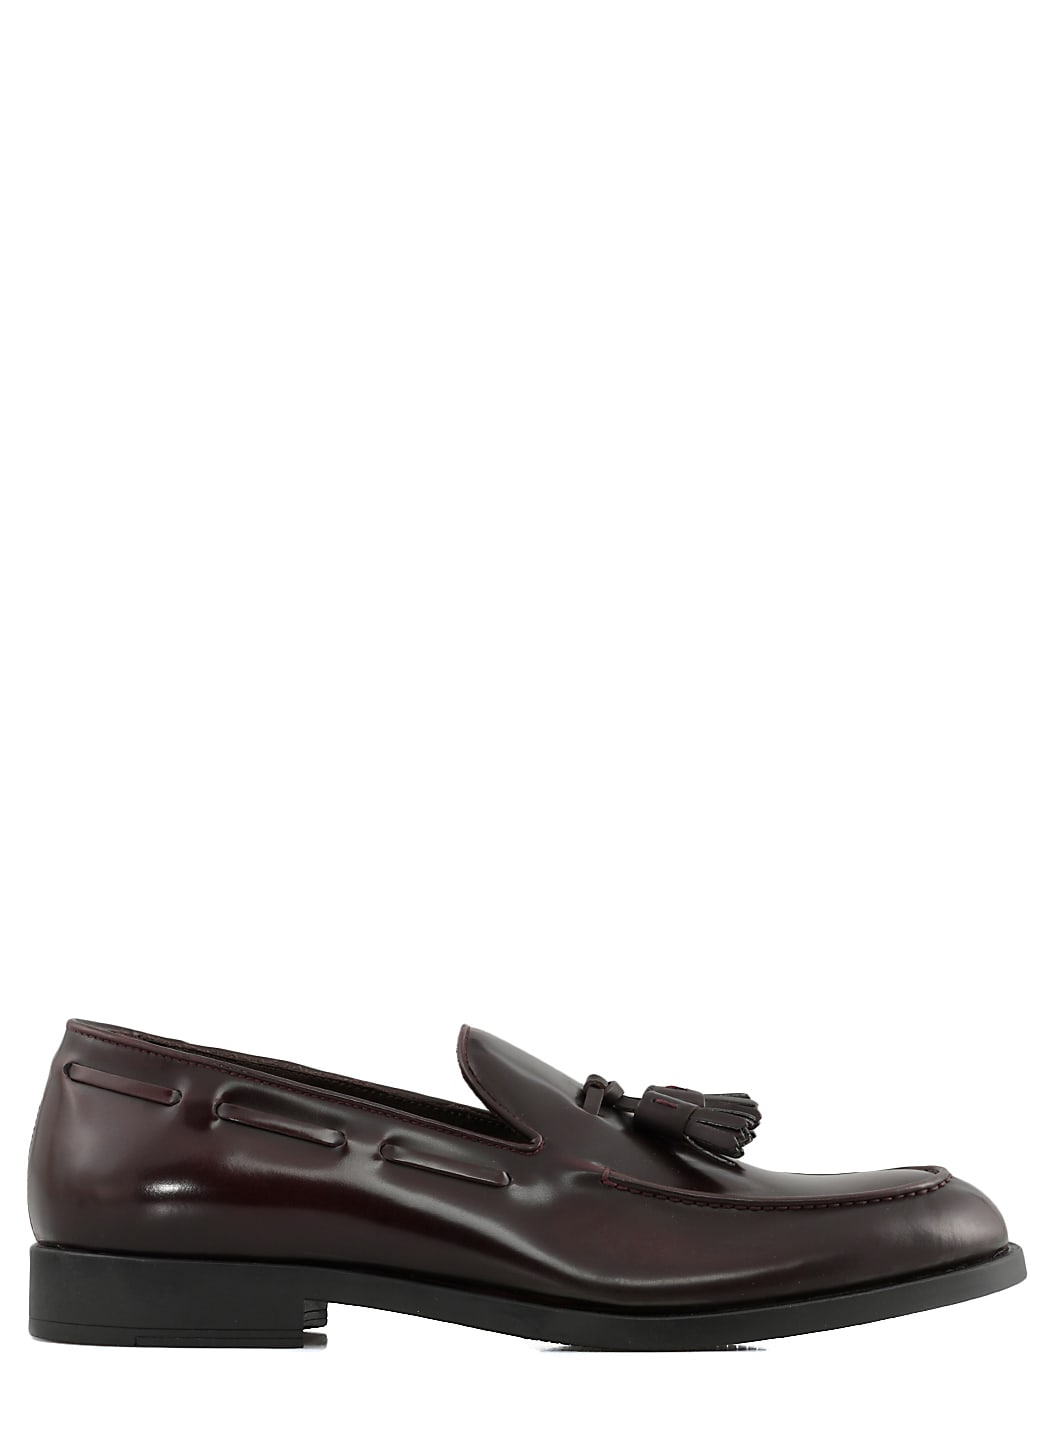 Fratelli Rossetti Leather Loafer